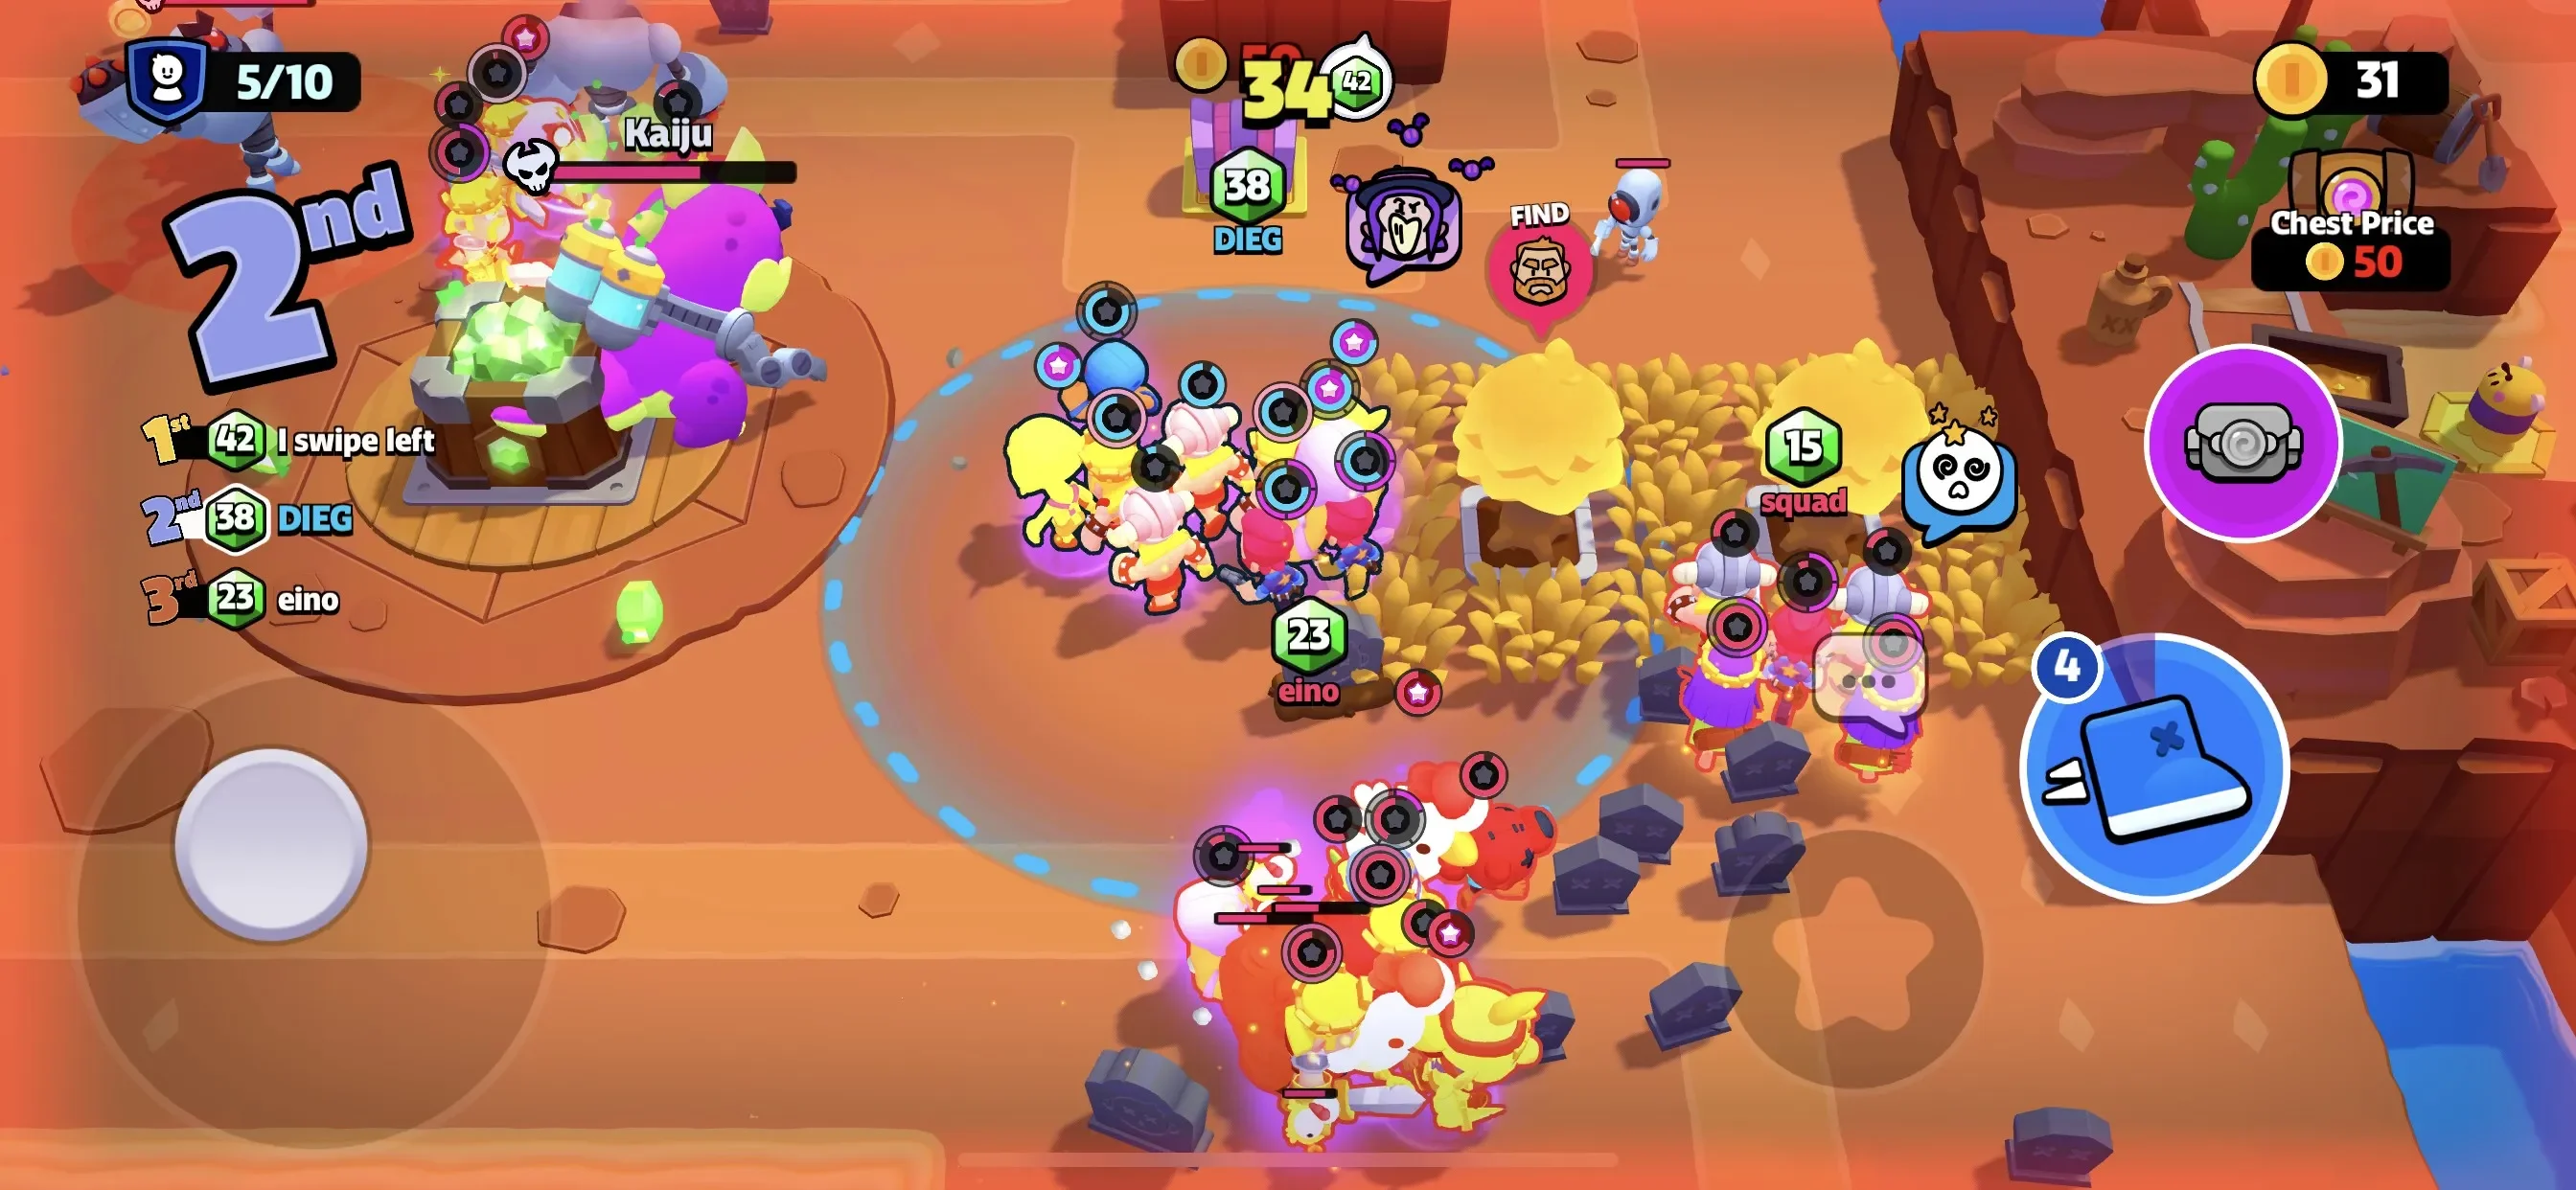 The creators of Brawl Stars and Clash Royale are releasing a new game for Android and iOS